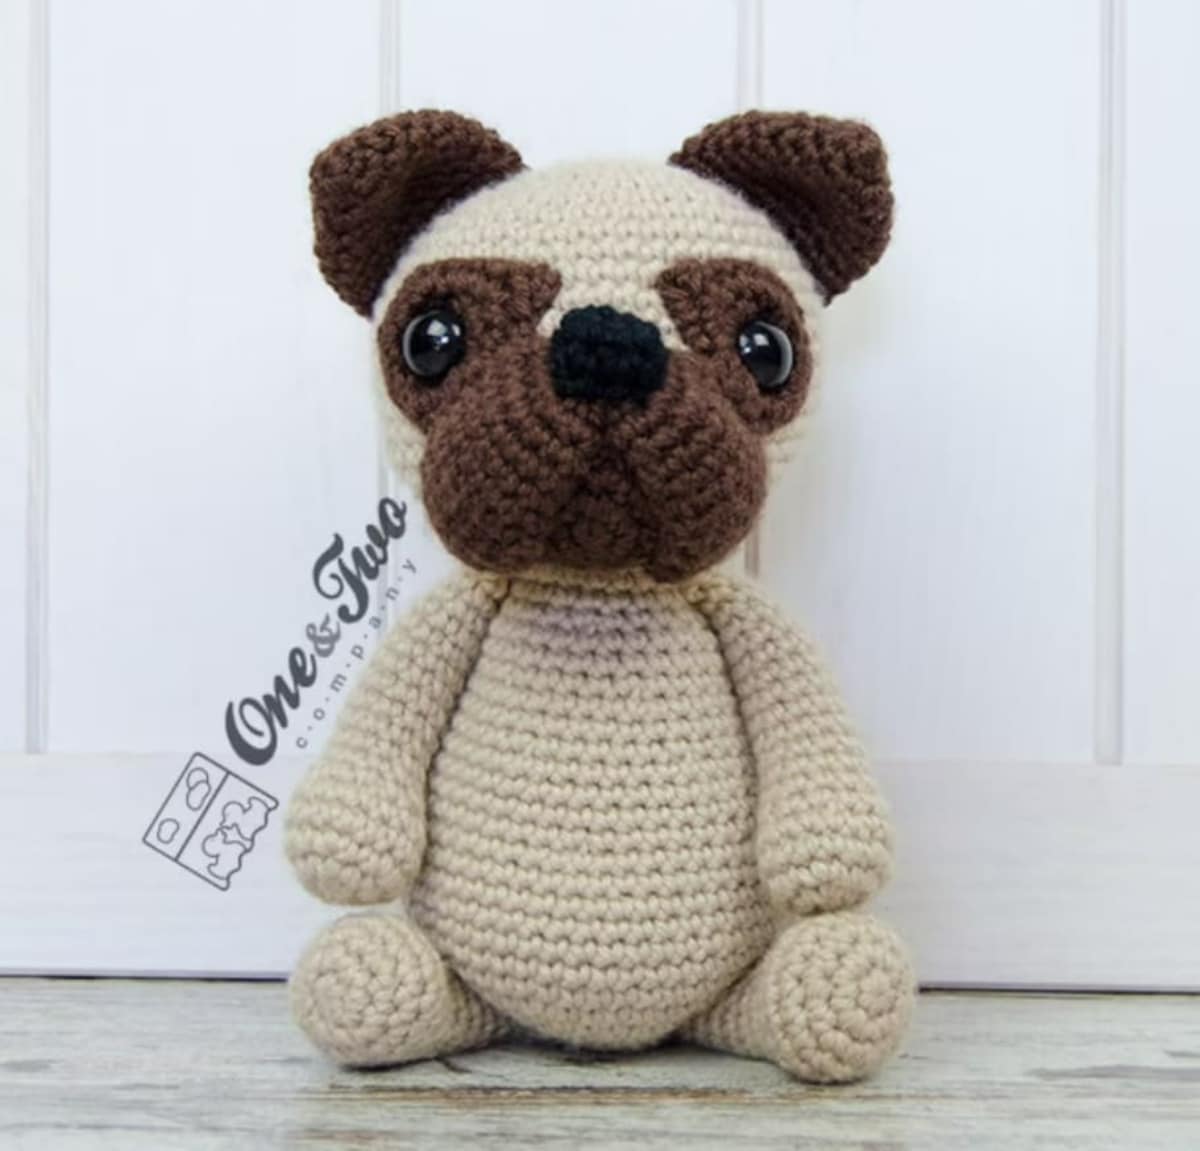 Crochet stuffed Pug with a beige body and brown eyes, nose, and years sitting up against a white wooden door.